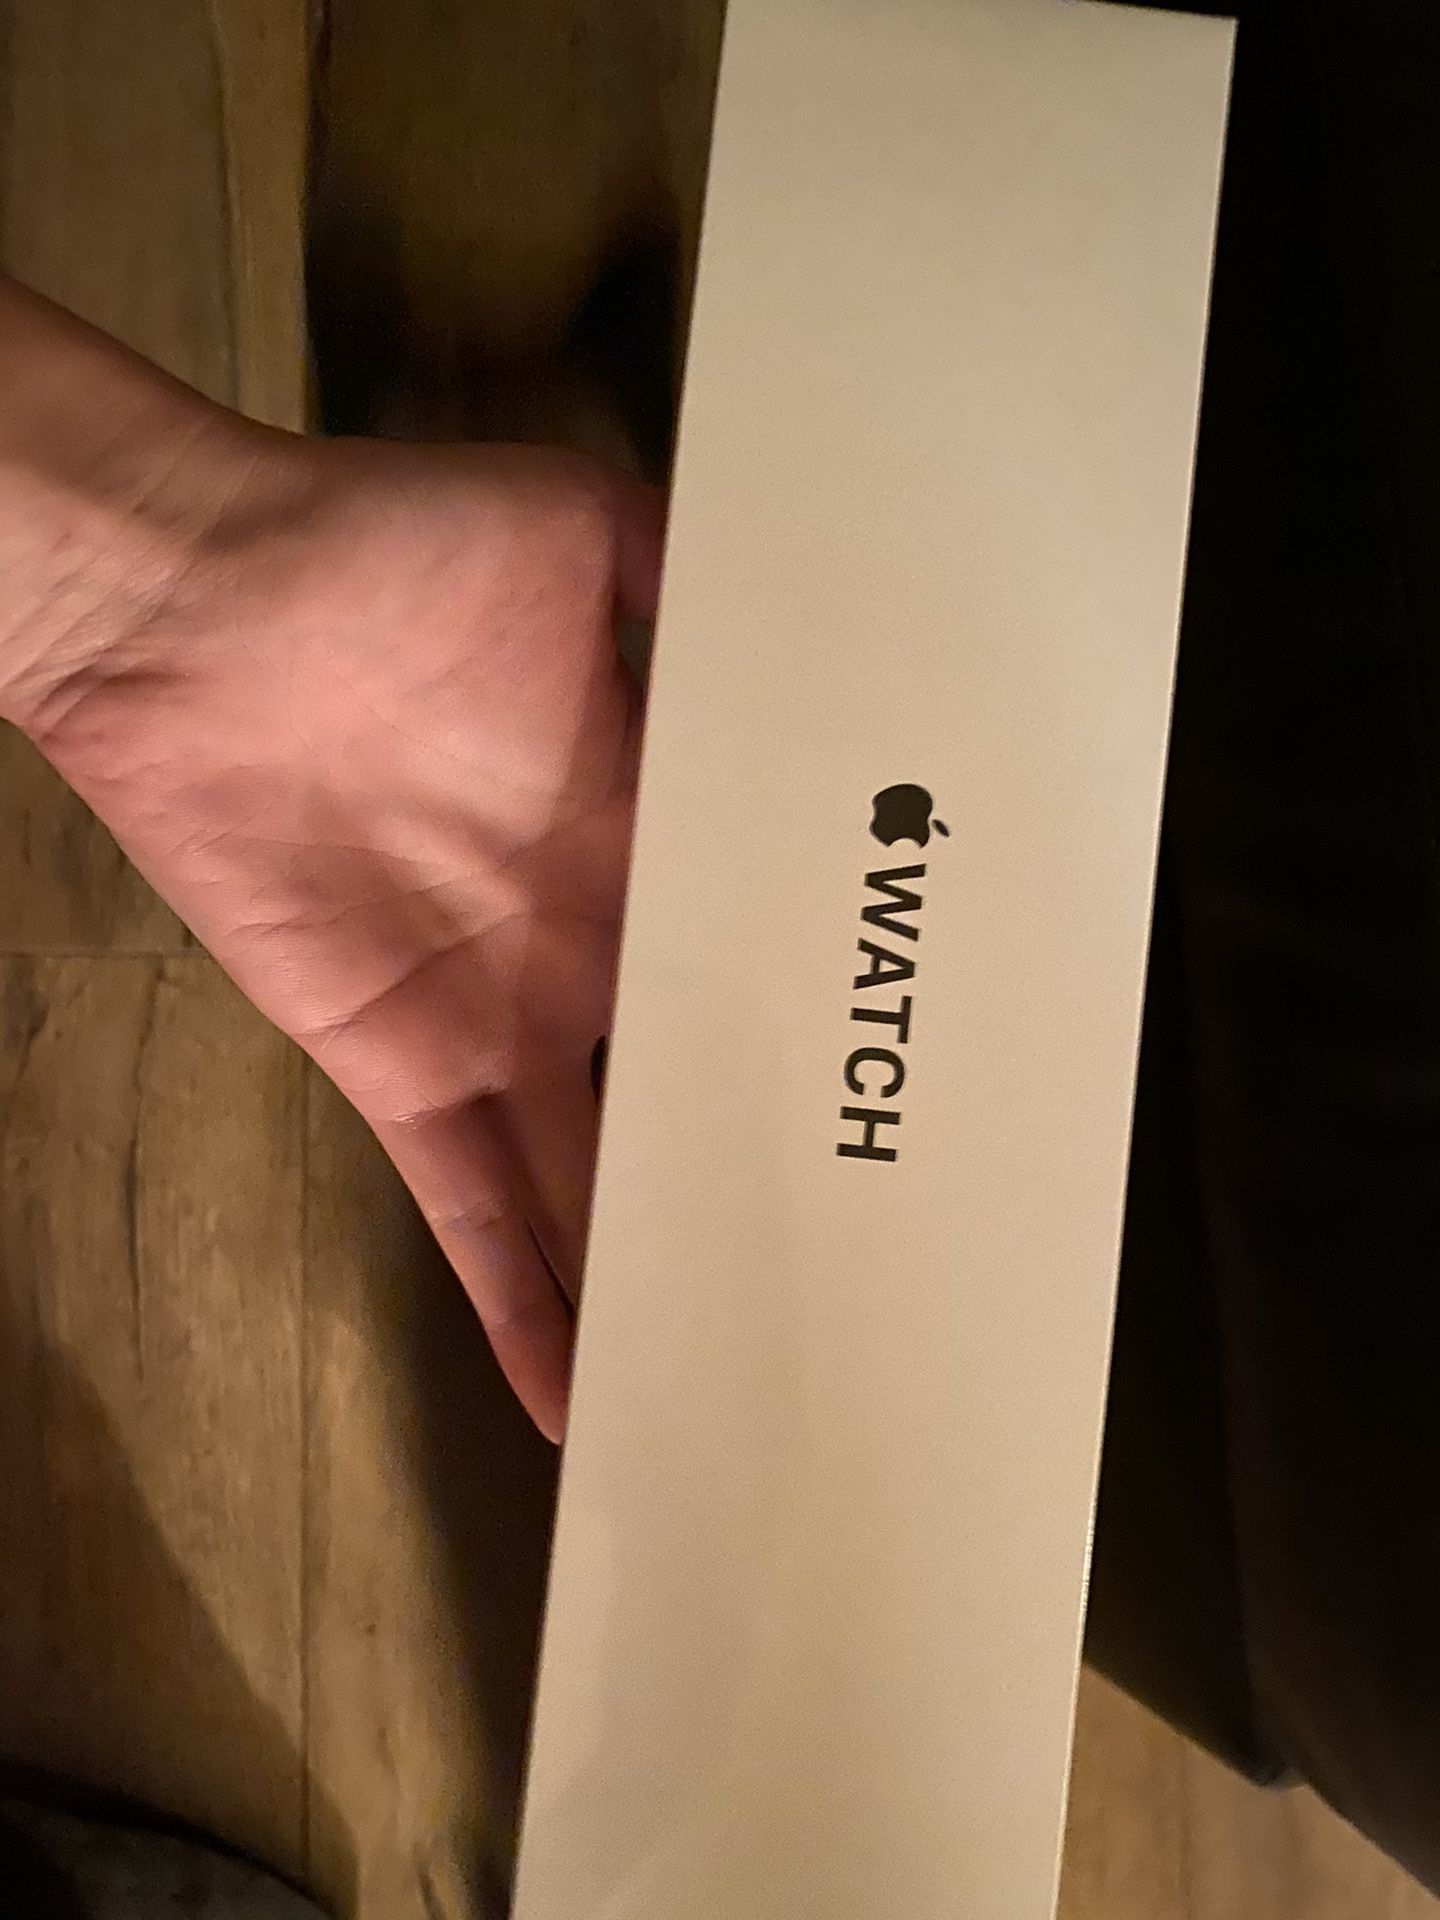 Apple Watch SE 40mm space grey black band